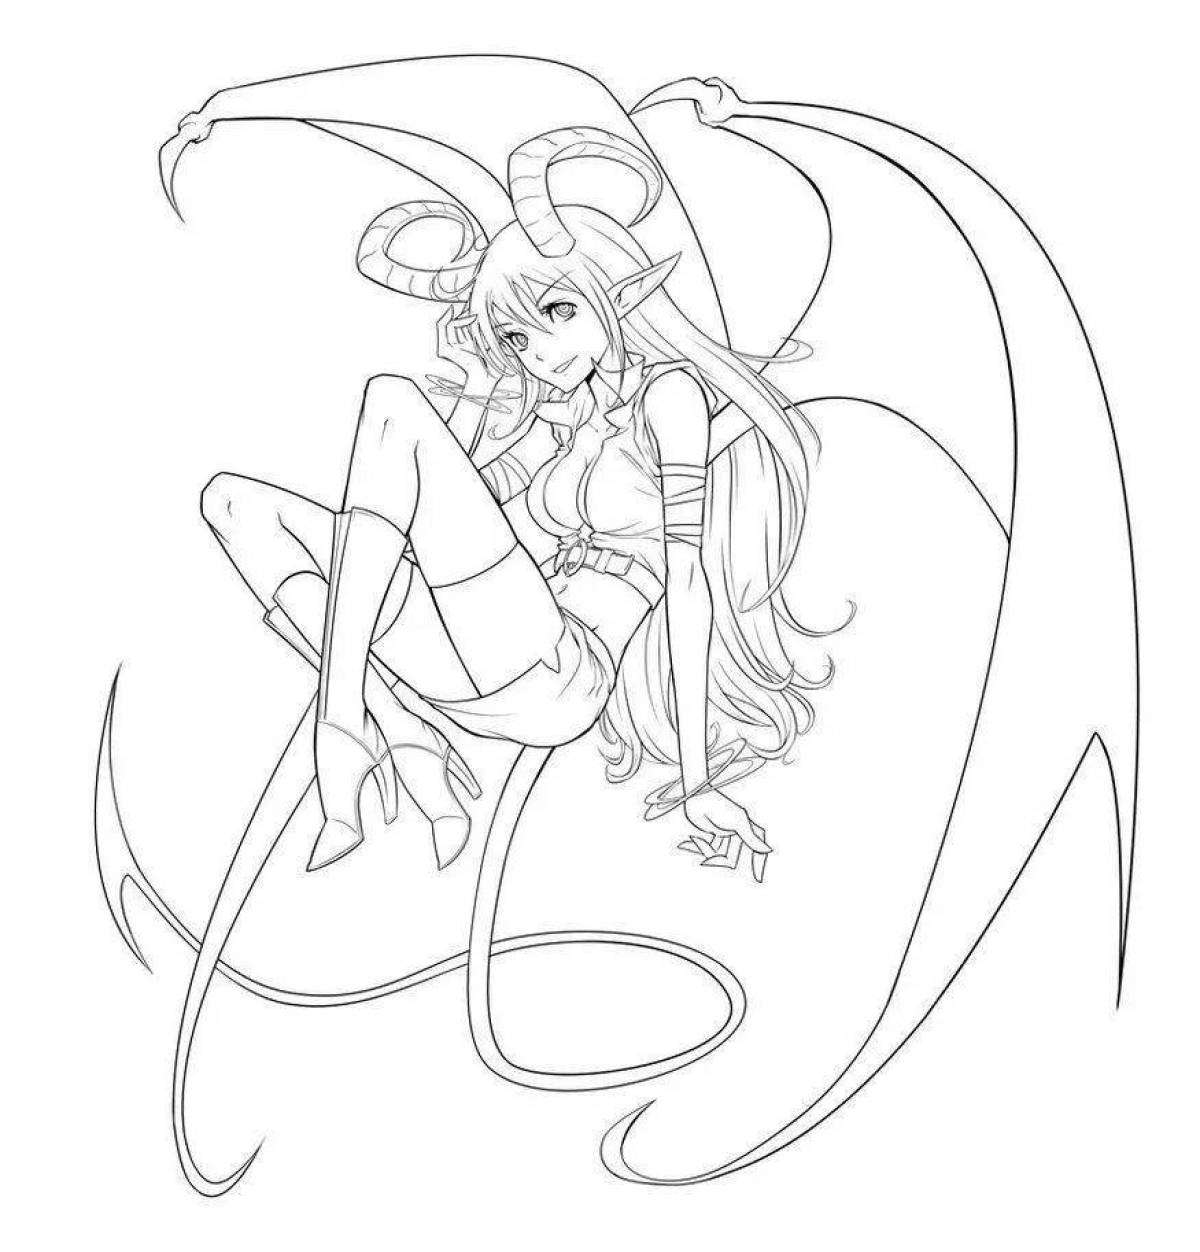 Coloring page sinful demon girl